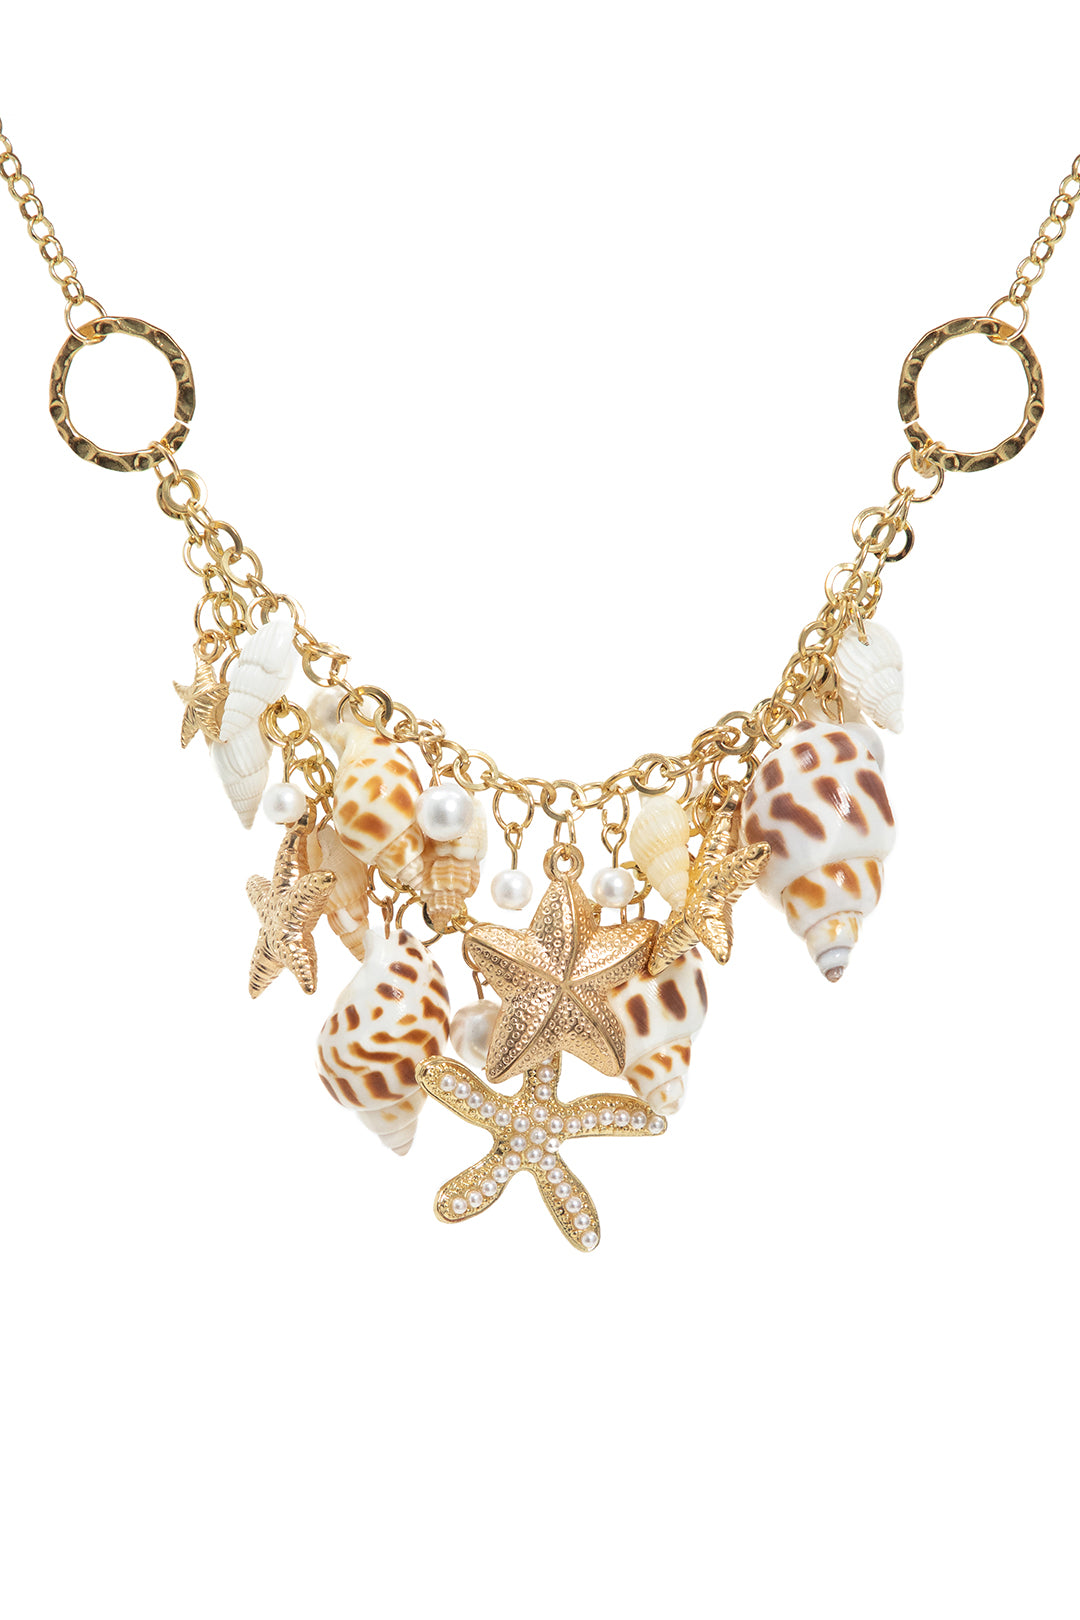 Seashell And Starfish Charm Necklace